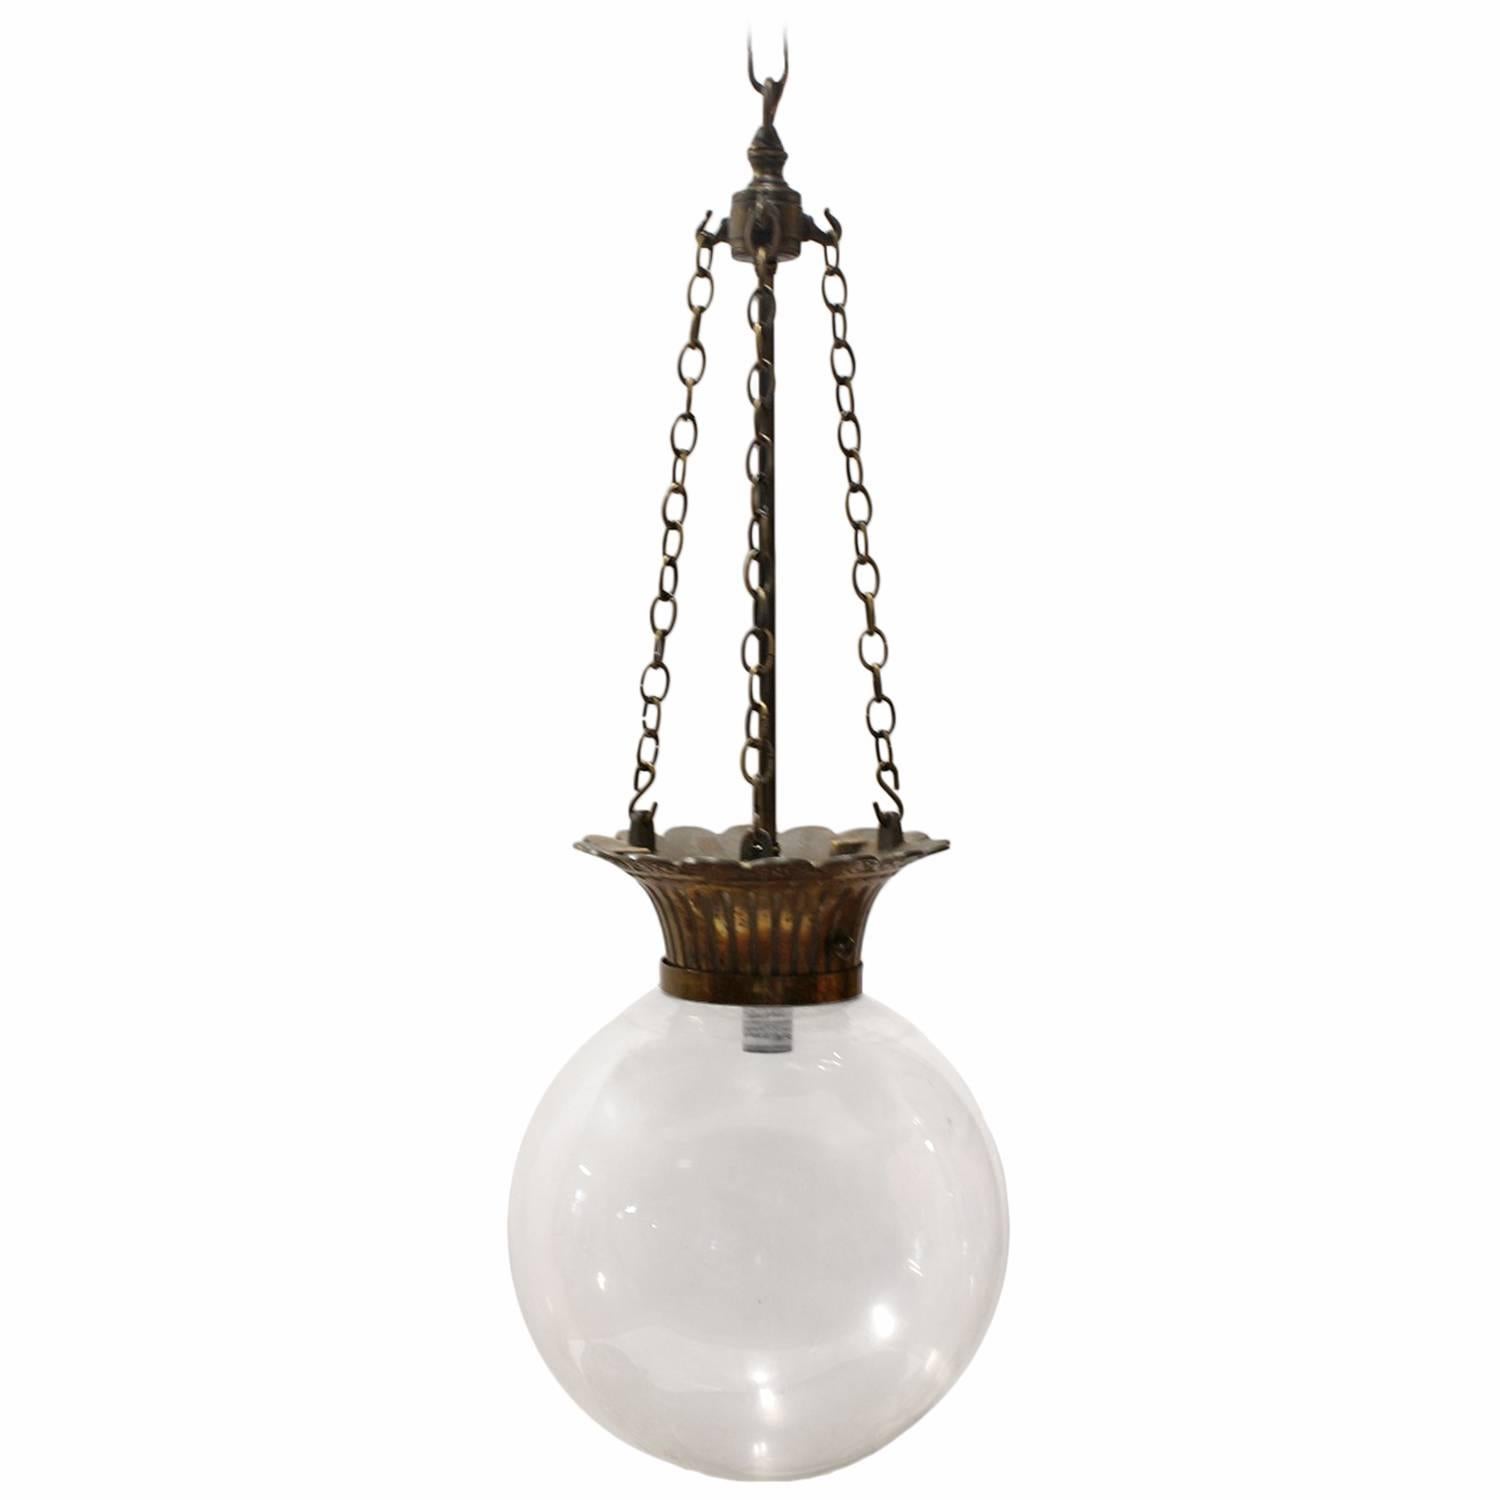 Antique Drugstore glass and bronze show globe chandelier. We have two available. Listed price is for each light. Rewired and in working condition.